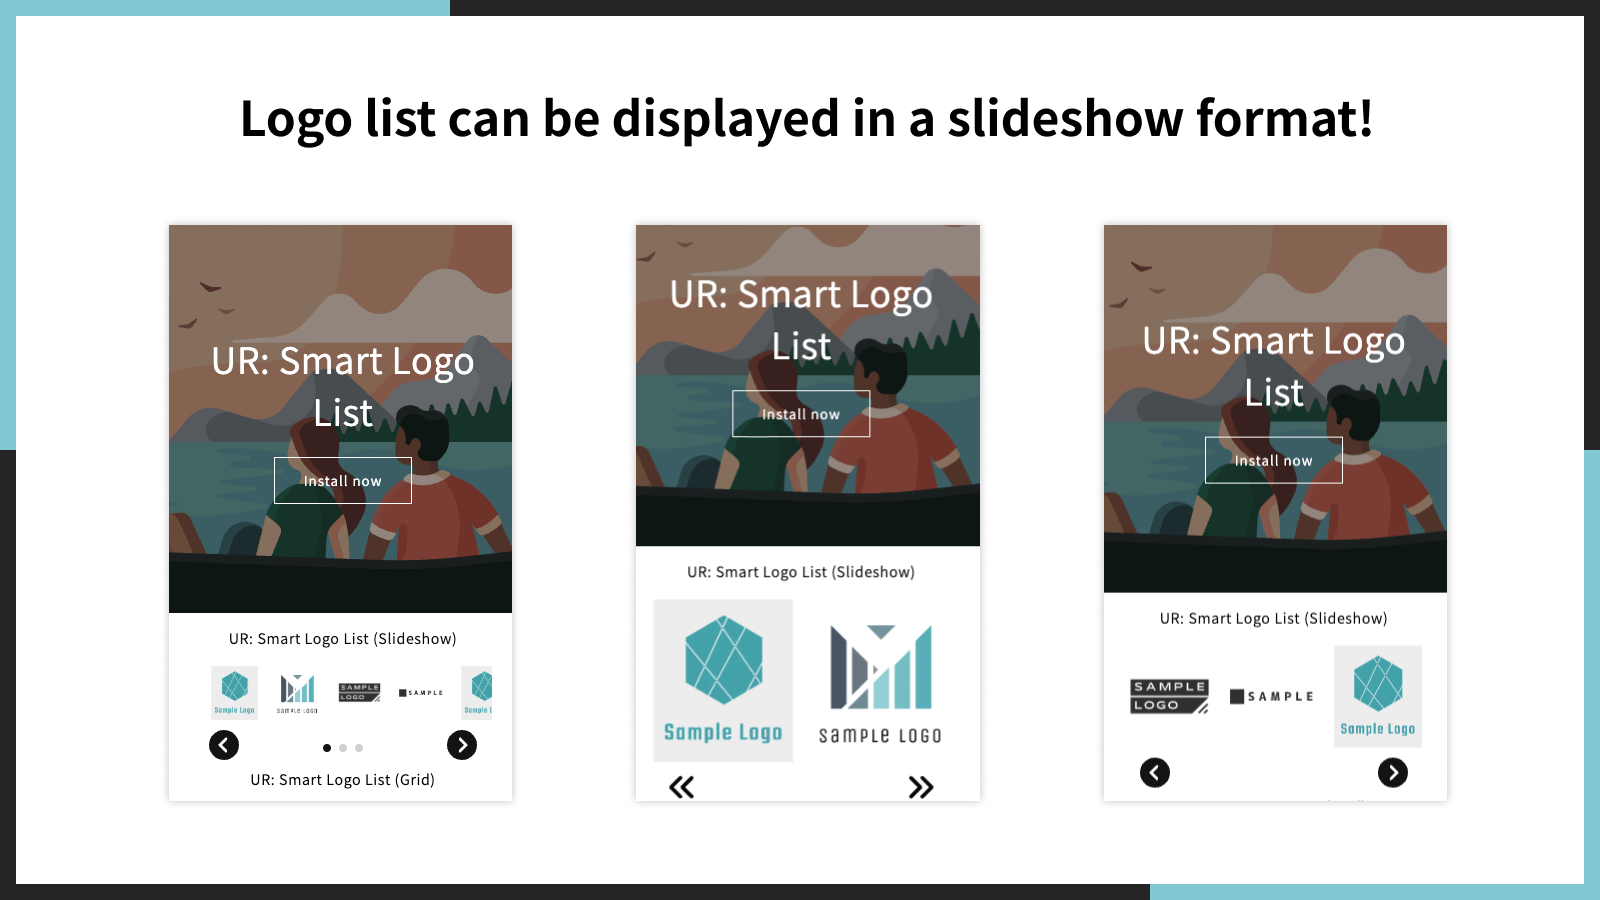 Logo list can be displayed in a slideshow format!